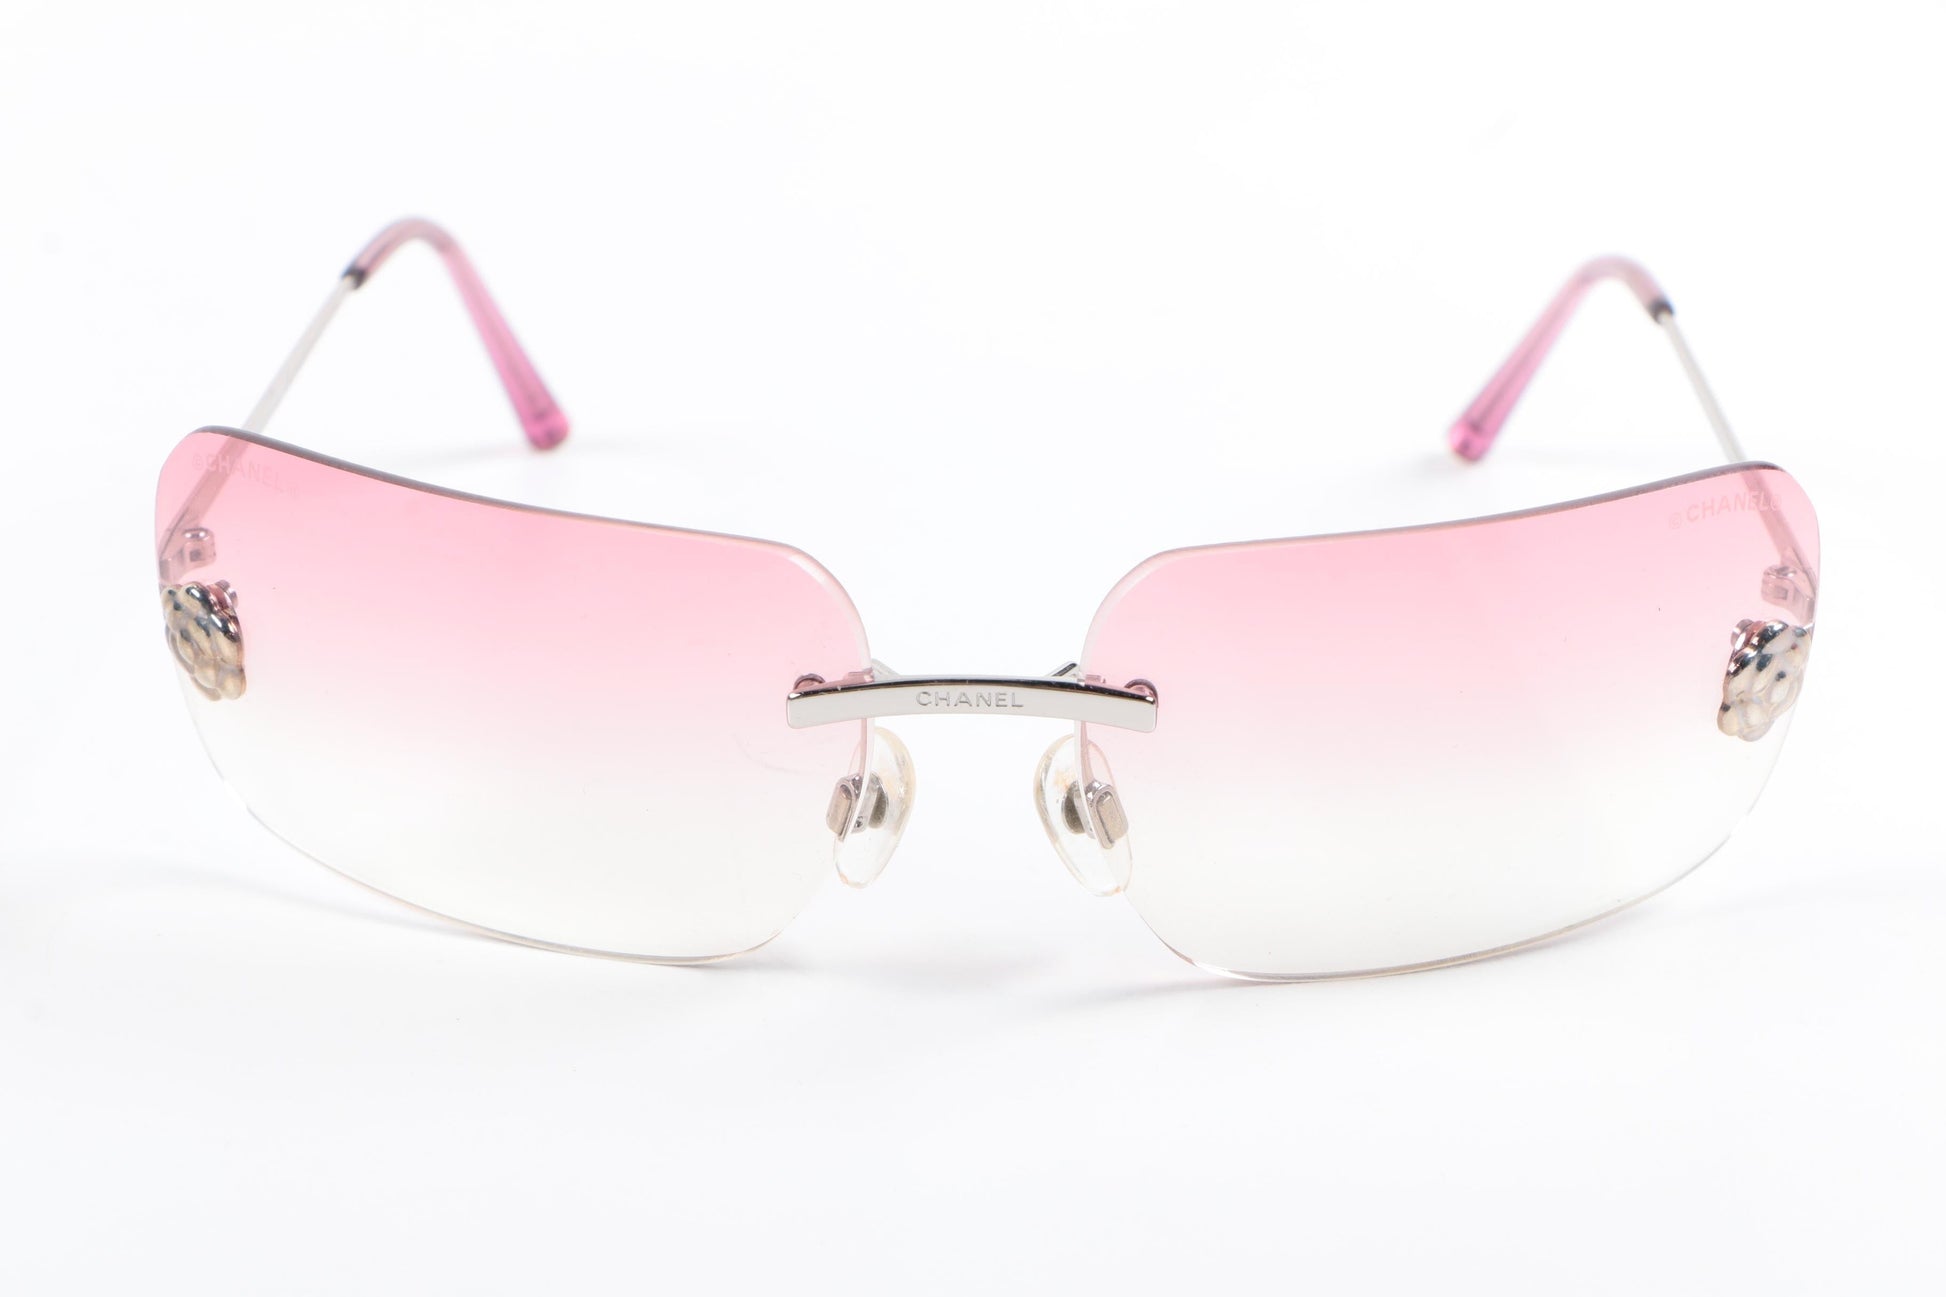 CHANEL Rimless Square Sunglasses Silver Pink Gradient Camellia Flower 4085  Auth